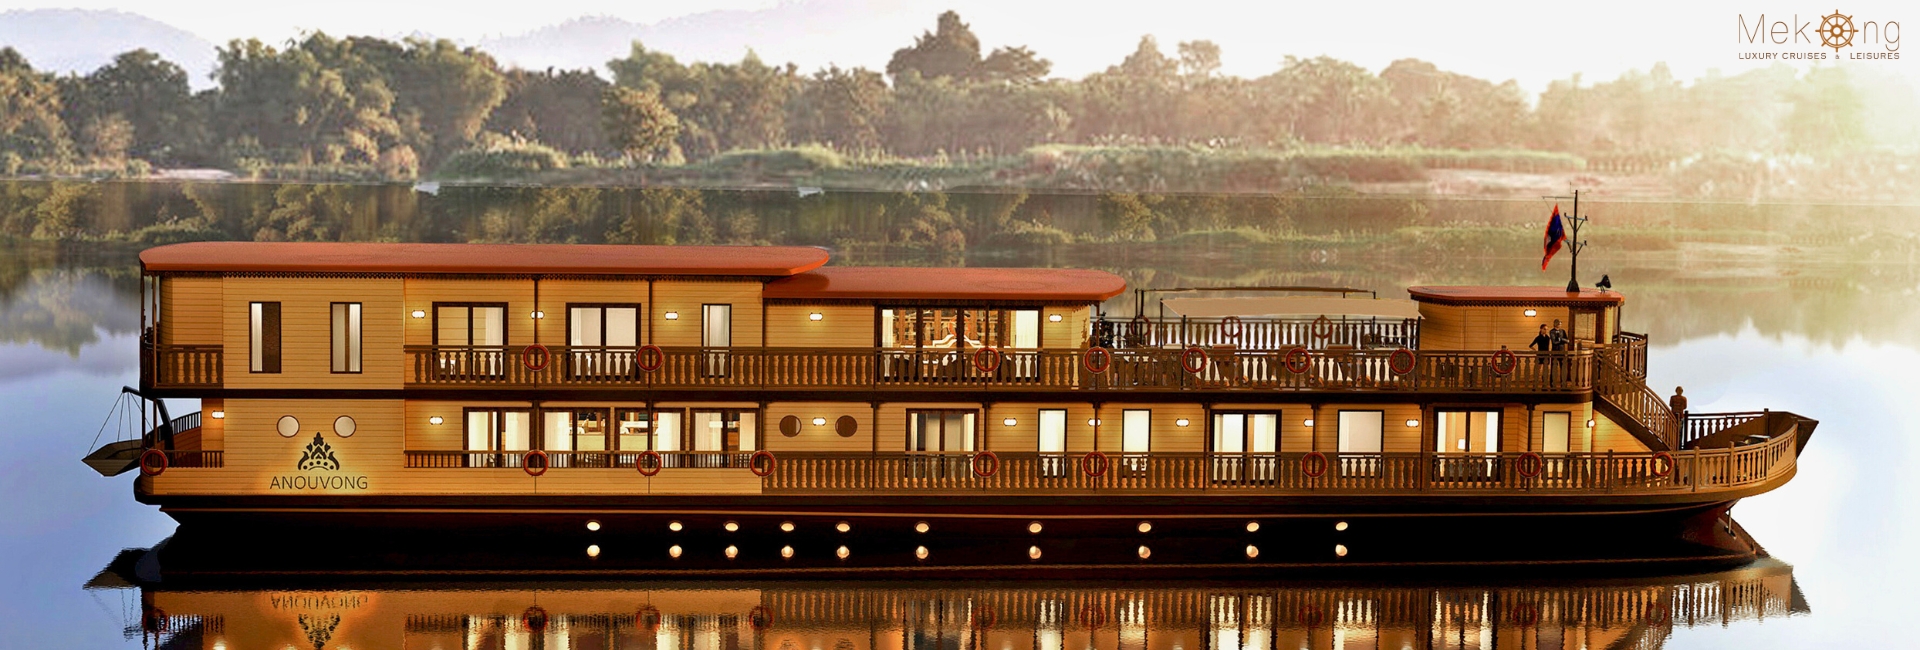 Heritage Line Anouvong Cruise in Laos